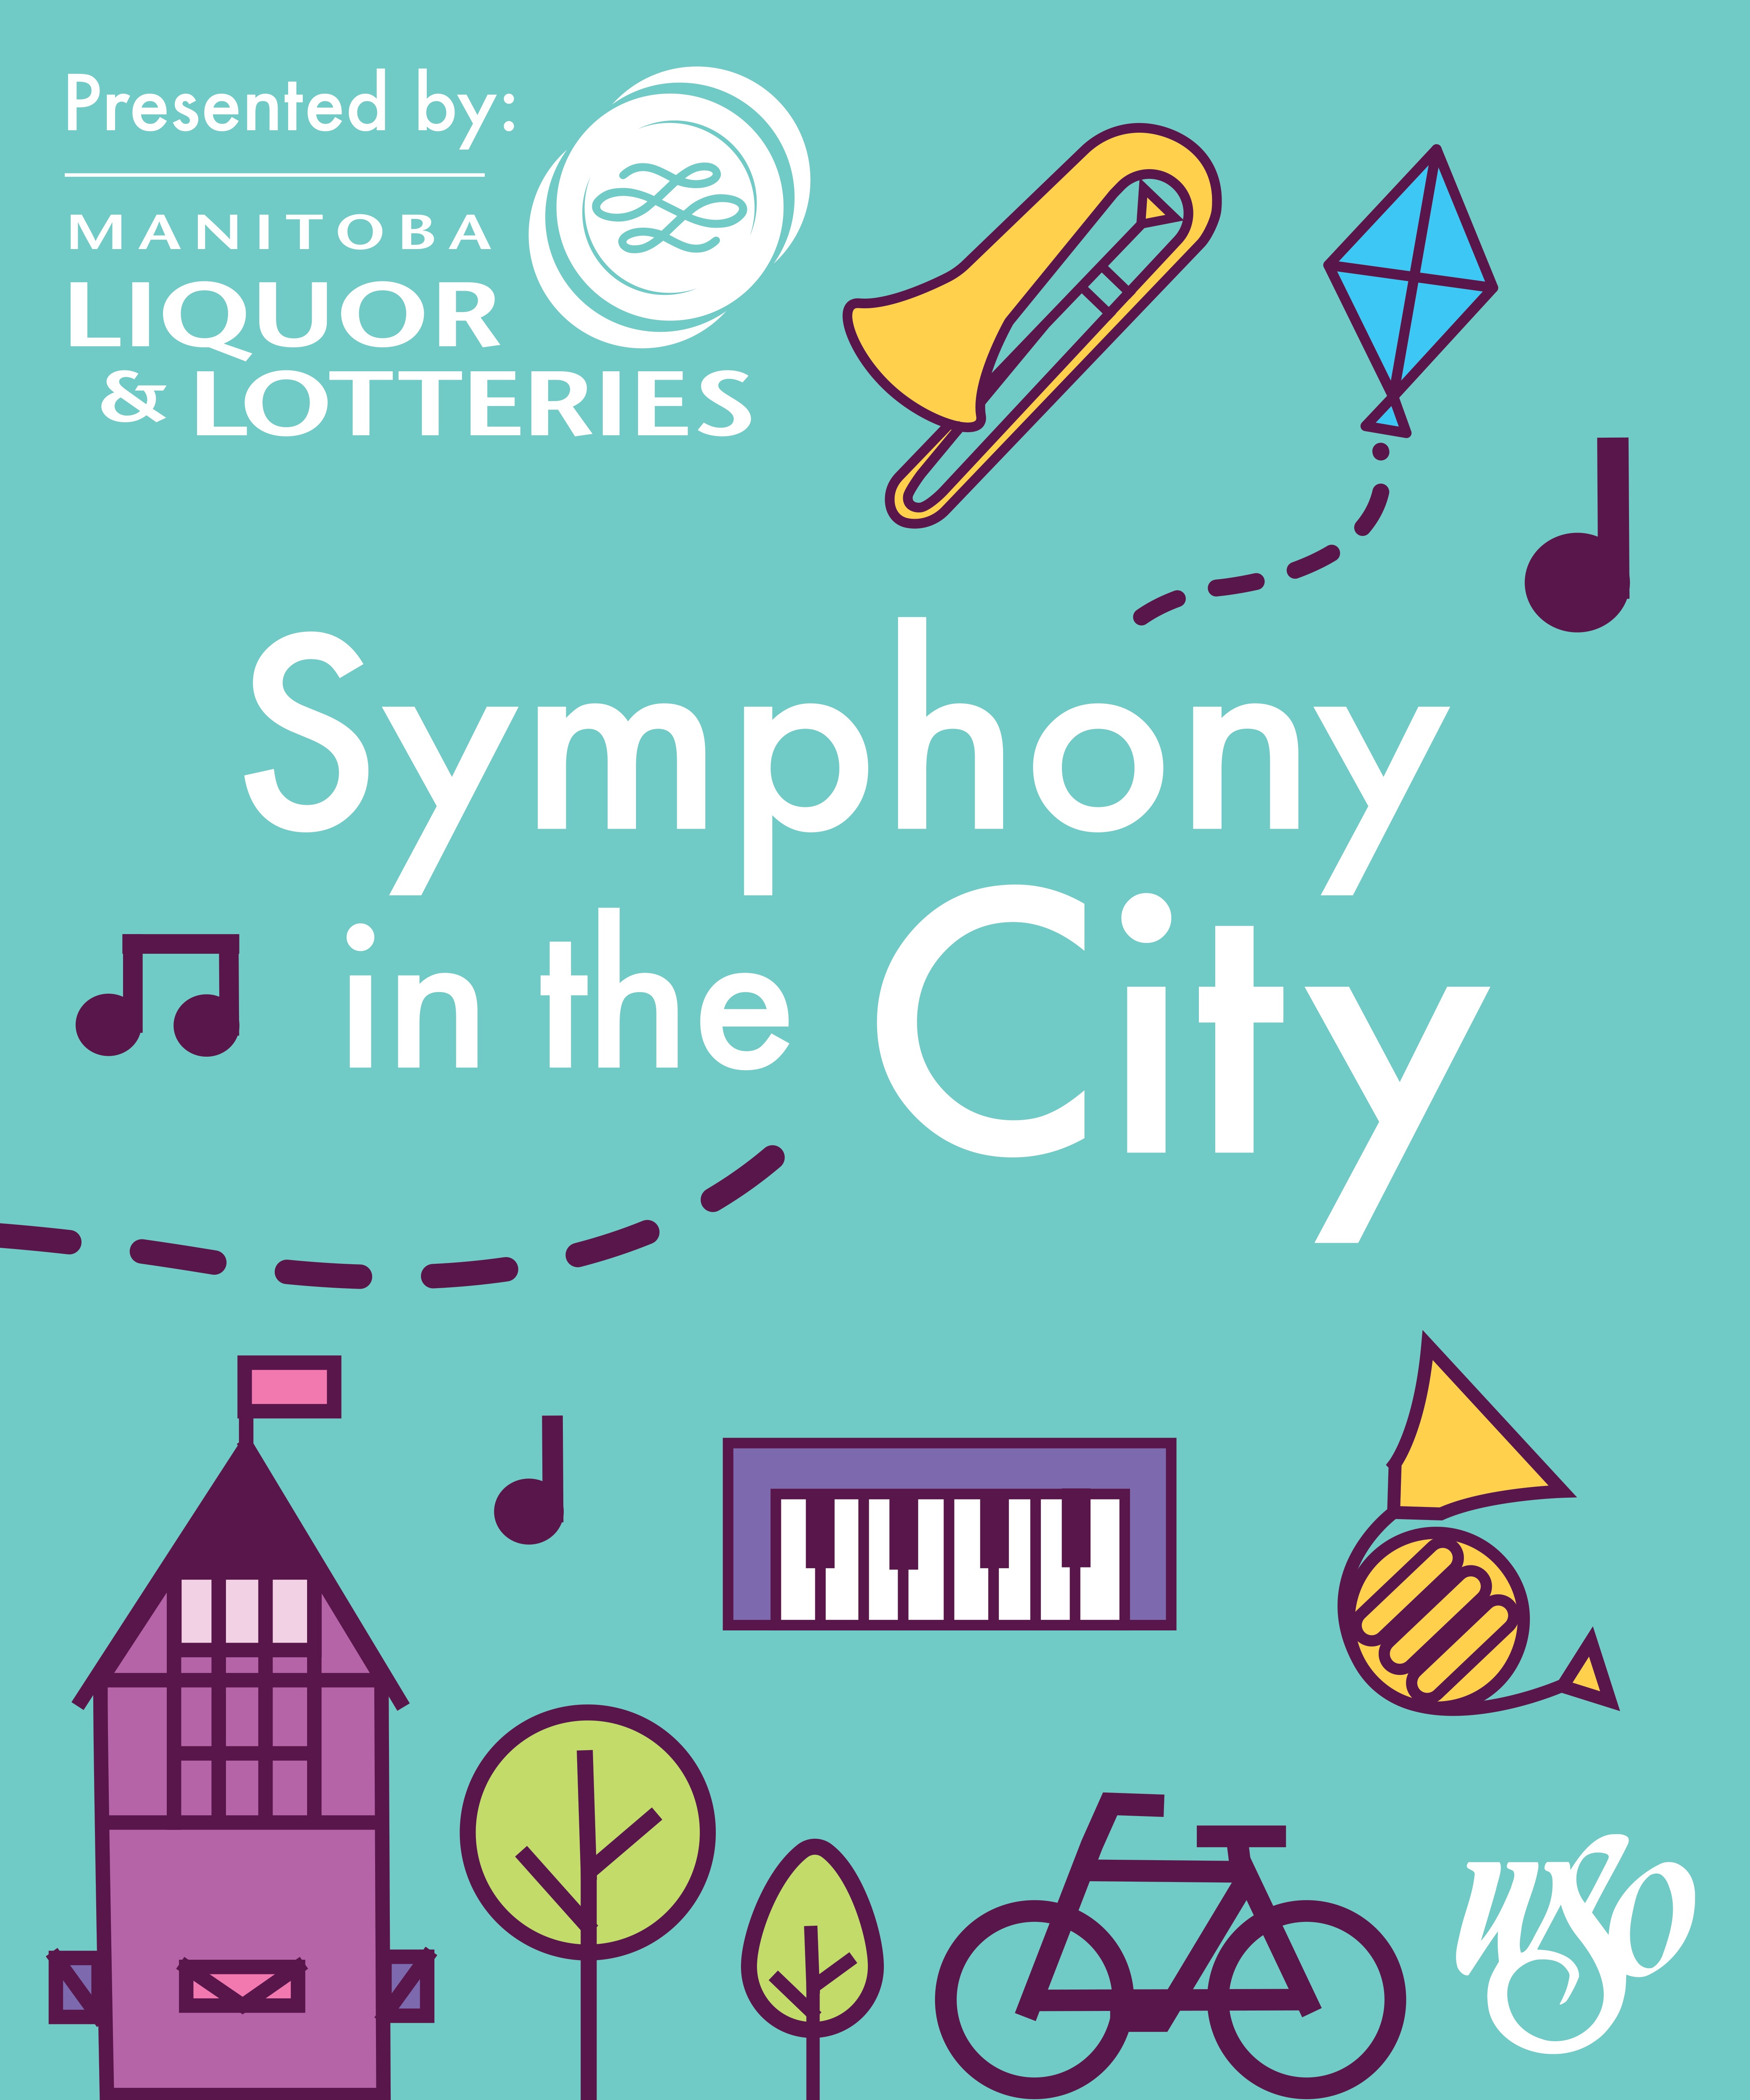 Symphony in the City.jpg (1.07 MB)